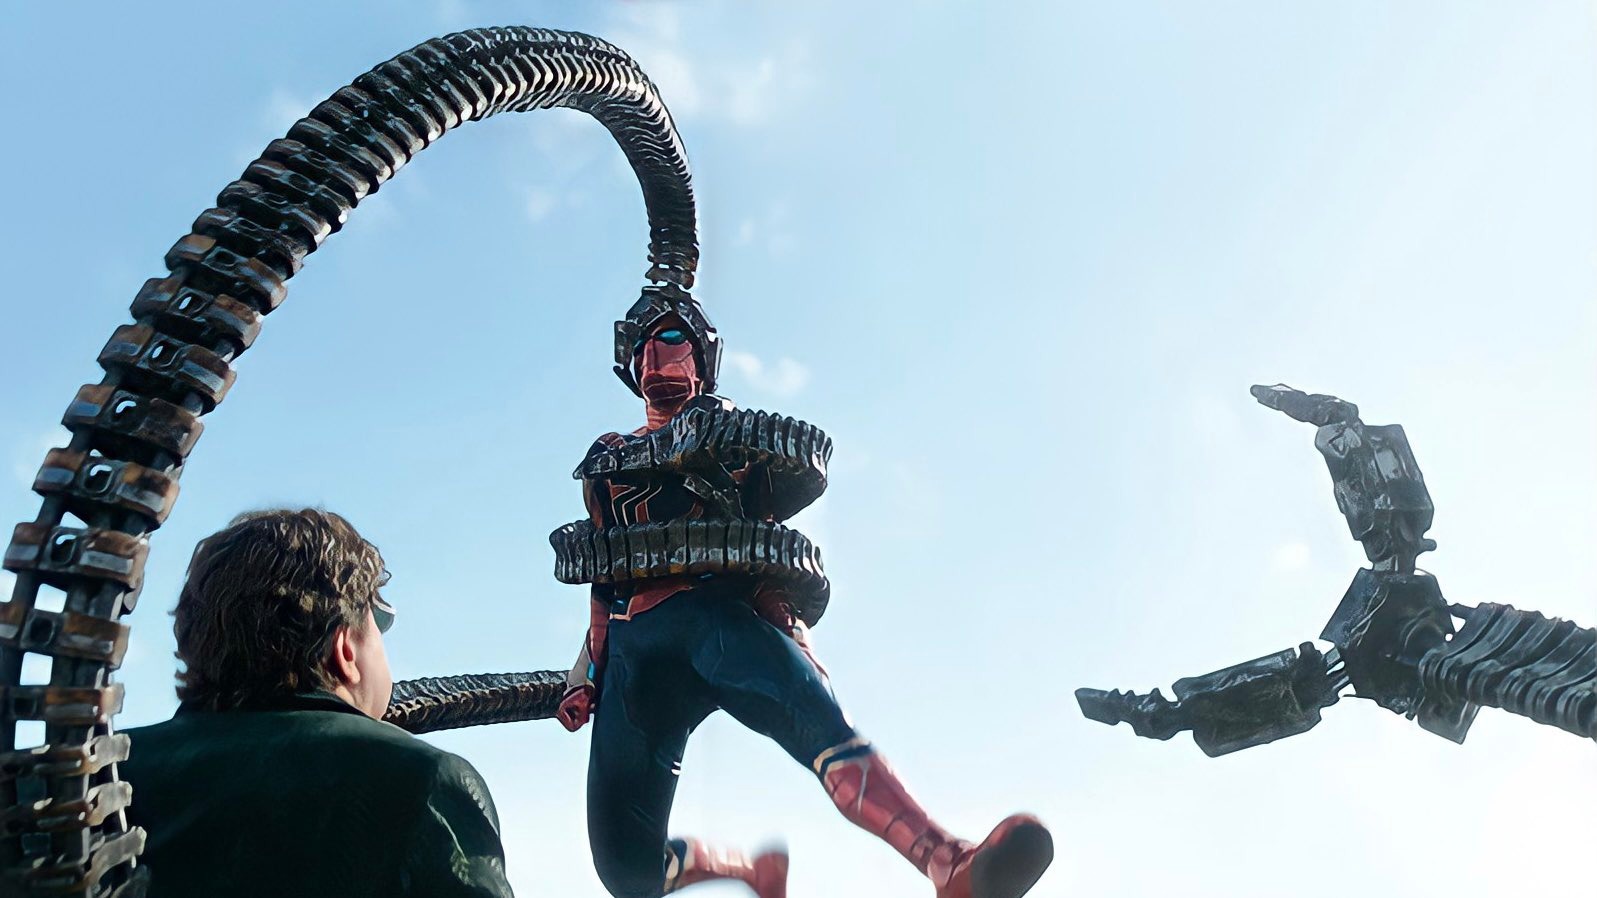 Doc Ock attacks in new Spider-Man: No Way Home images